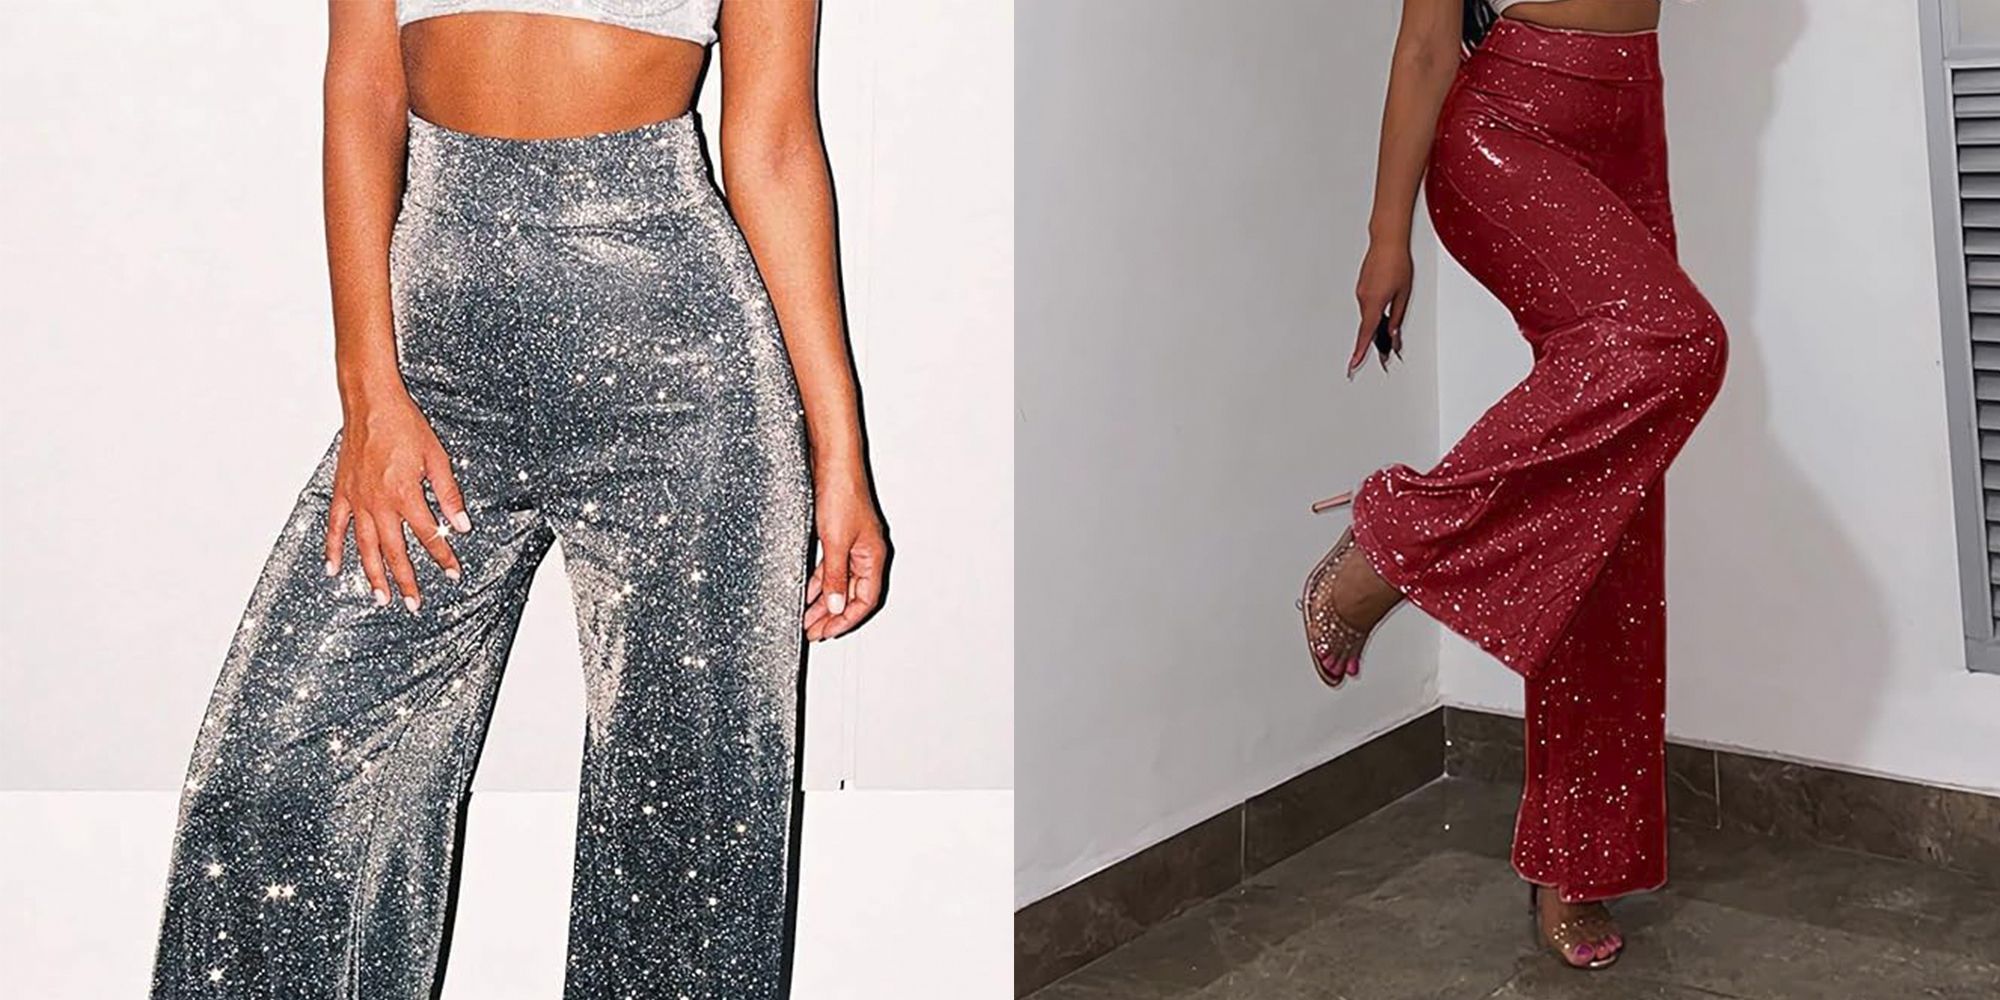 howtostyle Sequin Pants 5 Ways for the Holidays ✨ Which look is